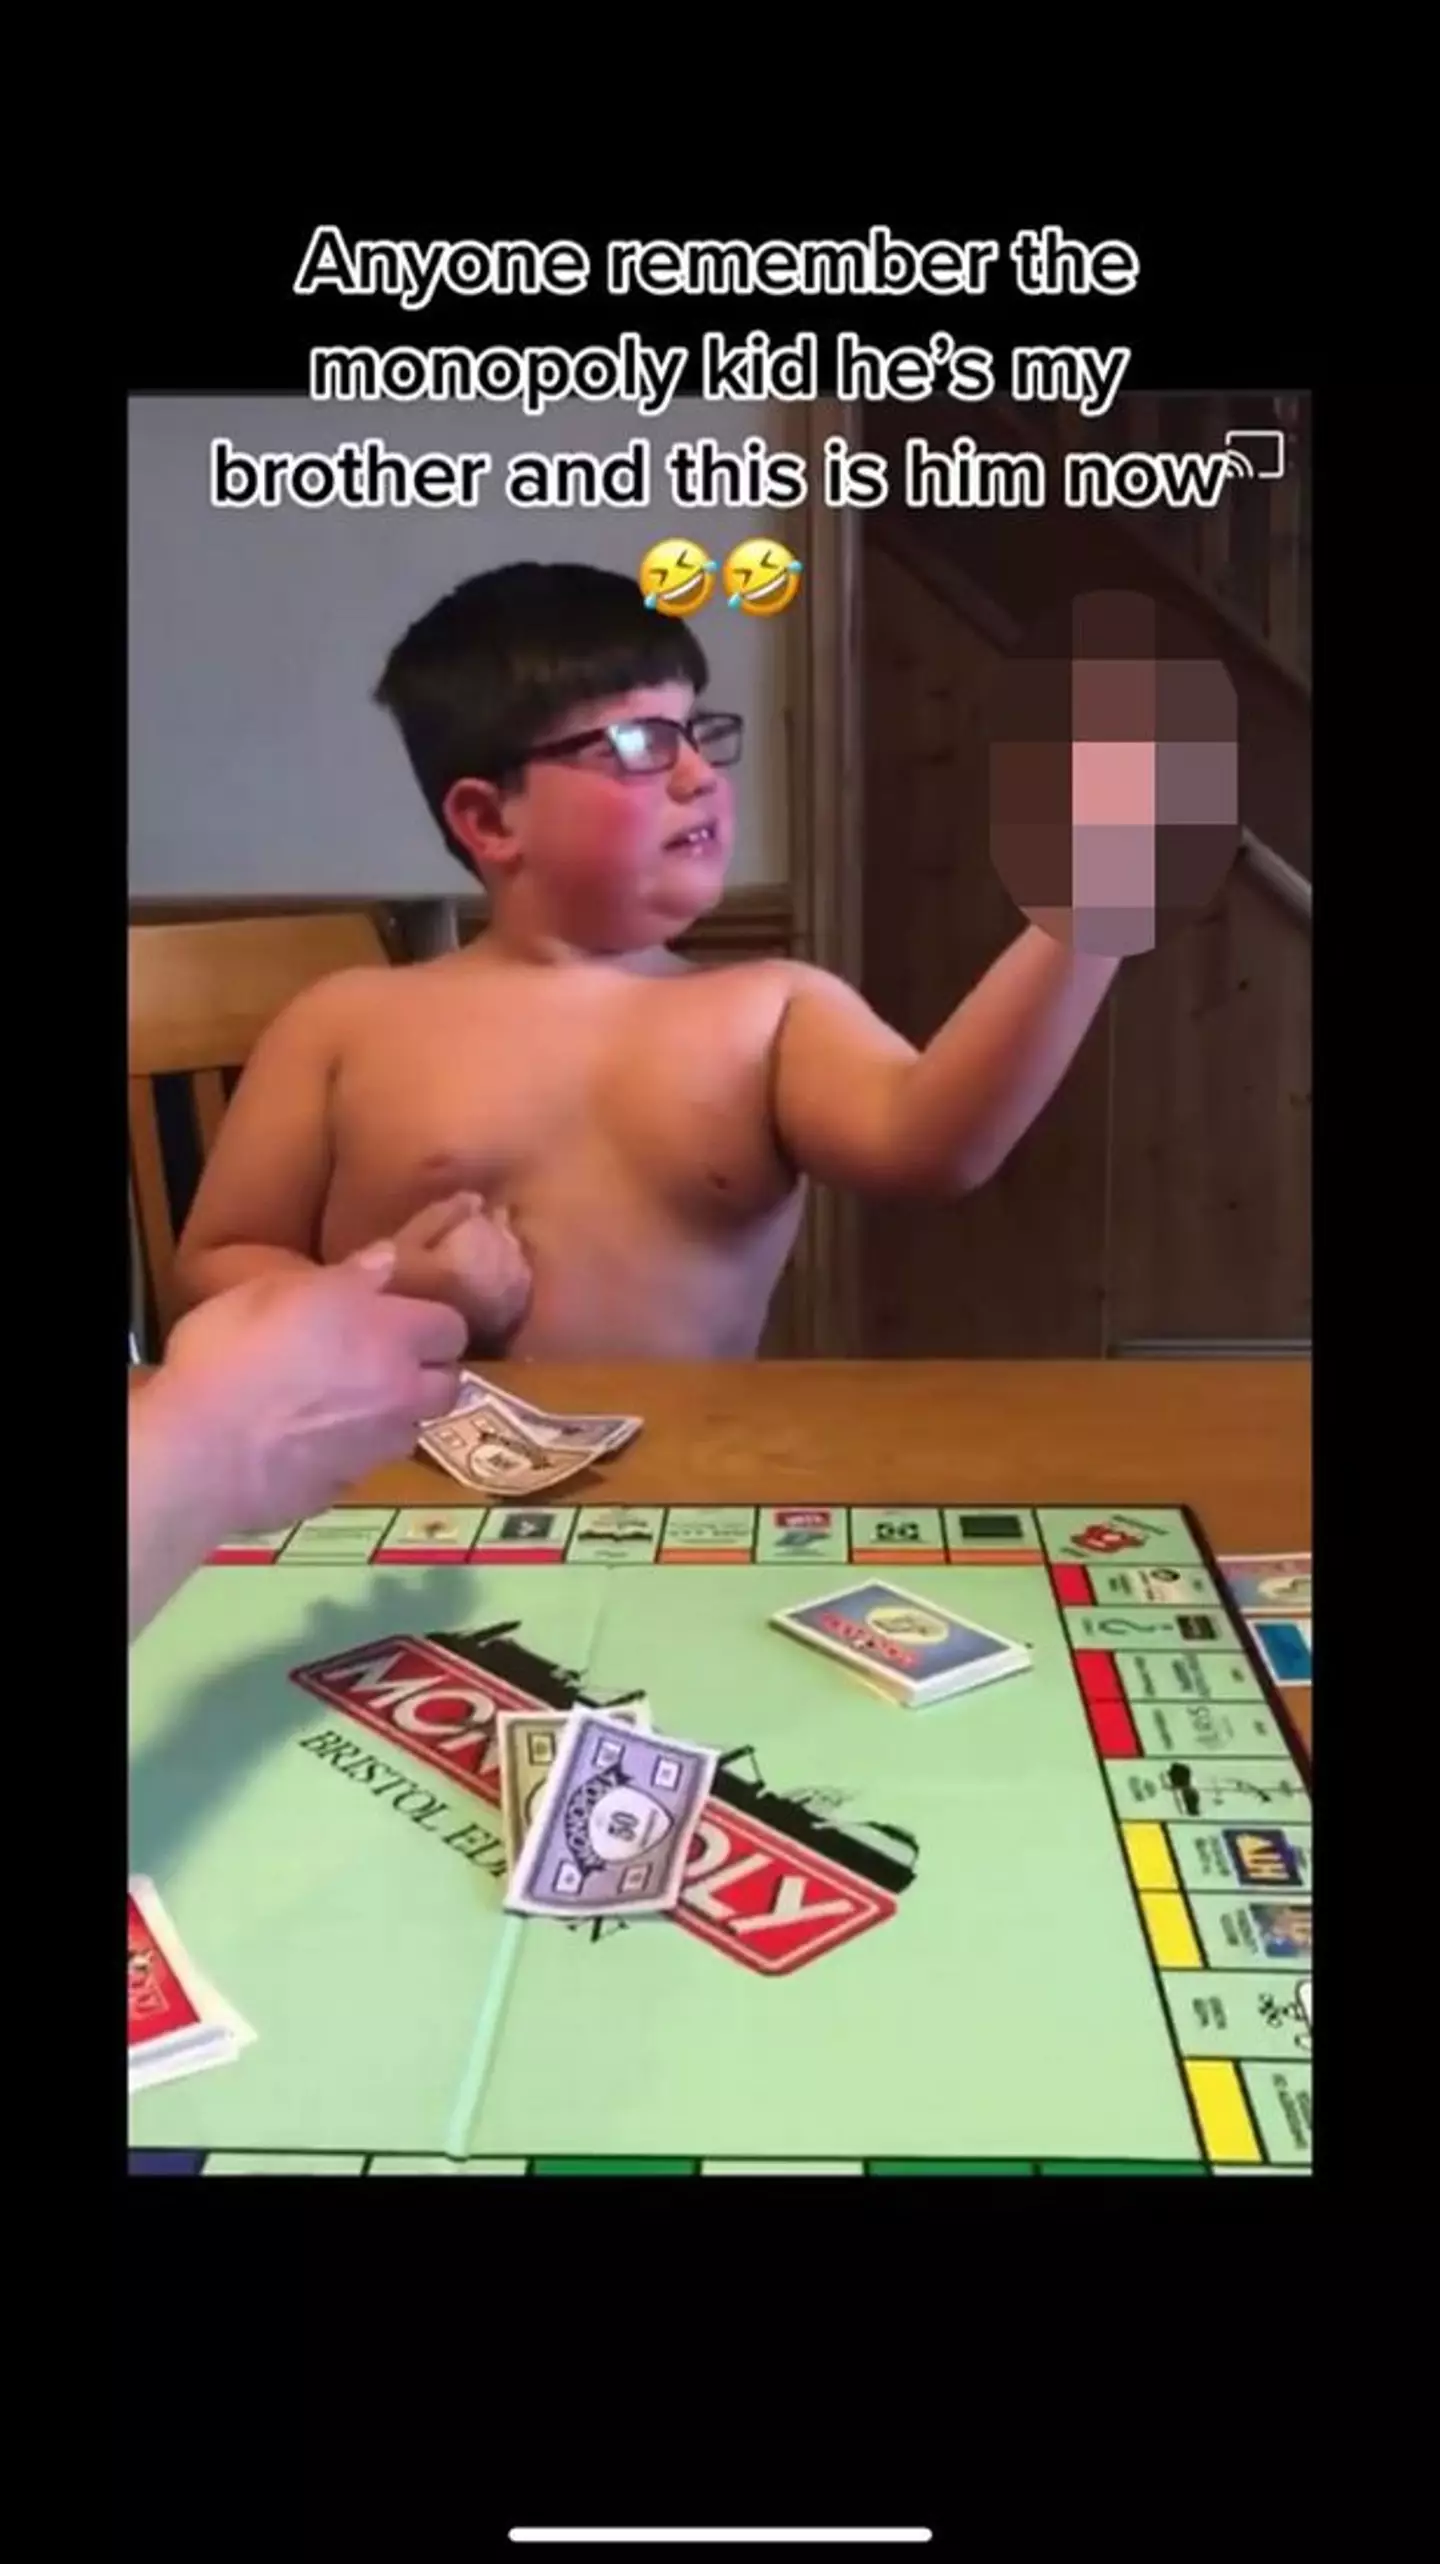 The angry Monopoly kid who went viral for giving his family the middle finger is back.